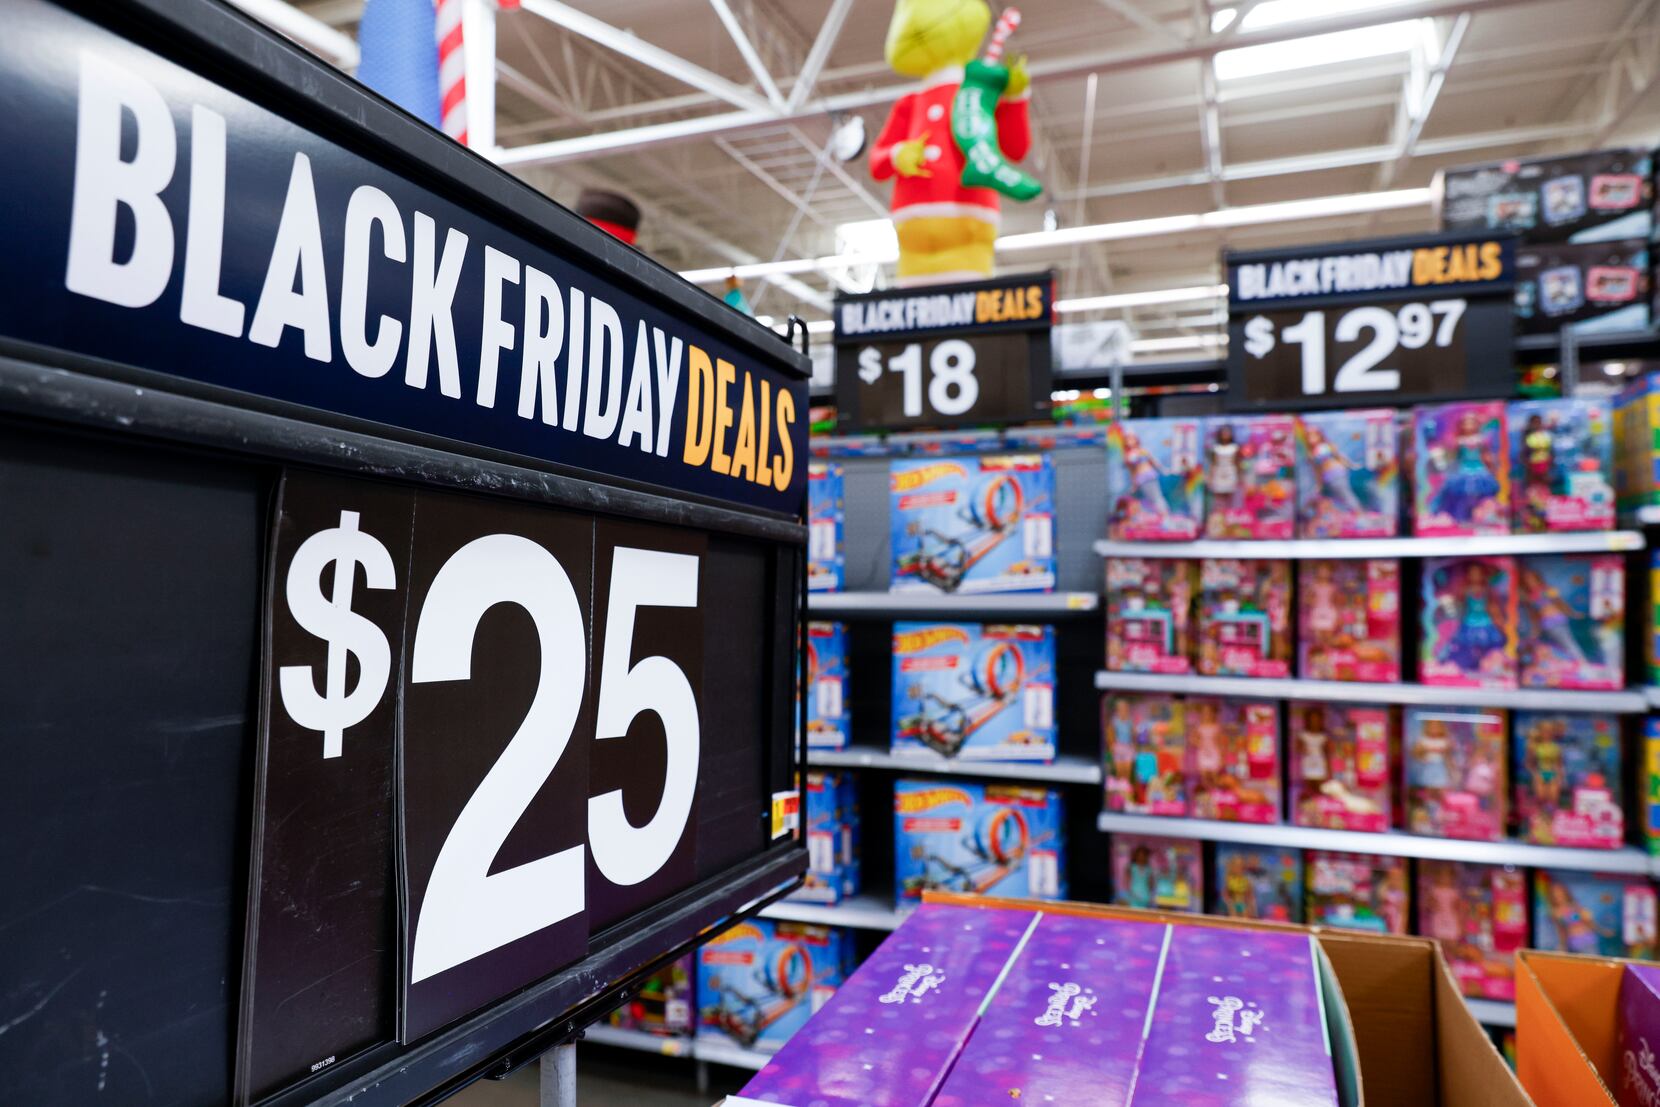 Walmart CEO says prices for toys and sporting goods are coming down